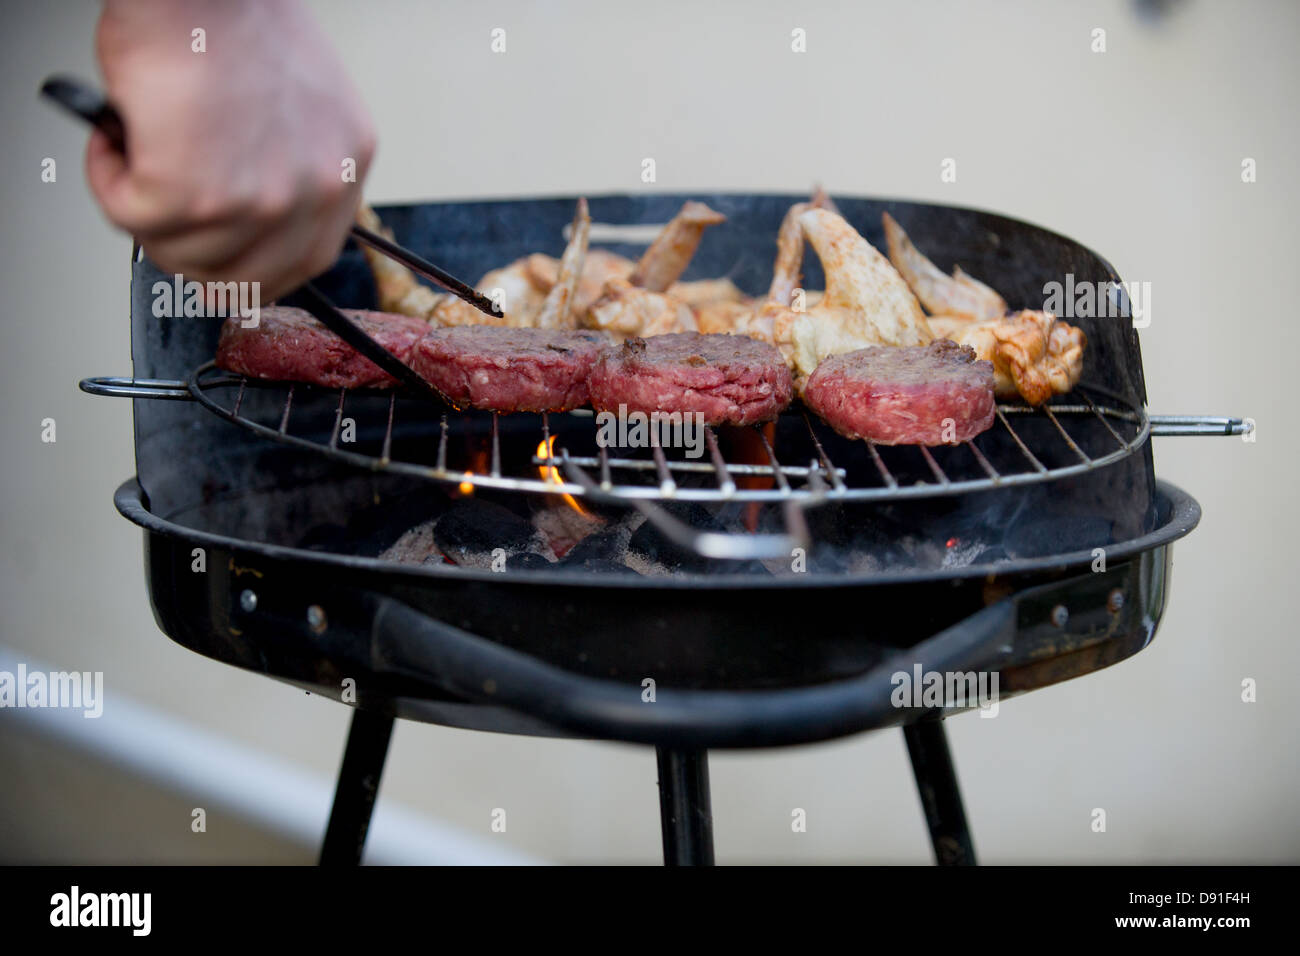 Beefburgers and chicken wings cooking on a barbeque in a British garden. Stock Photo